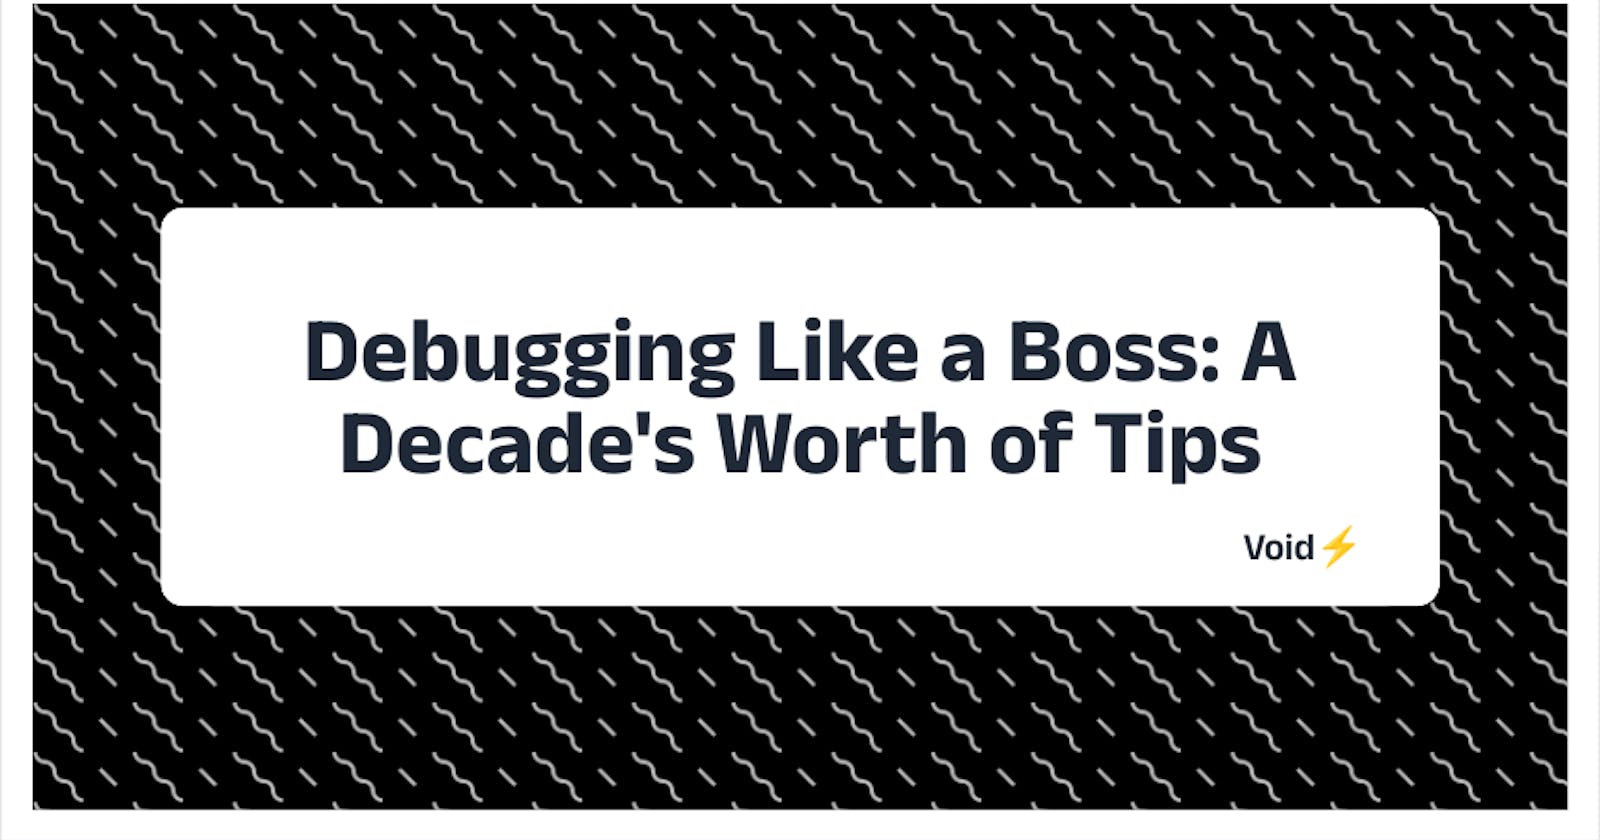 Debugging Like a Boss: A Decade's Worth of Tips